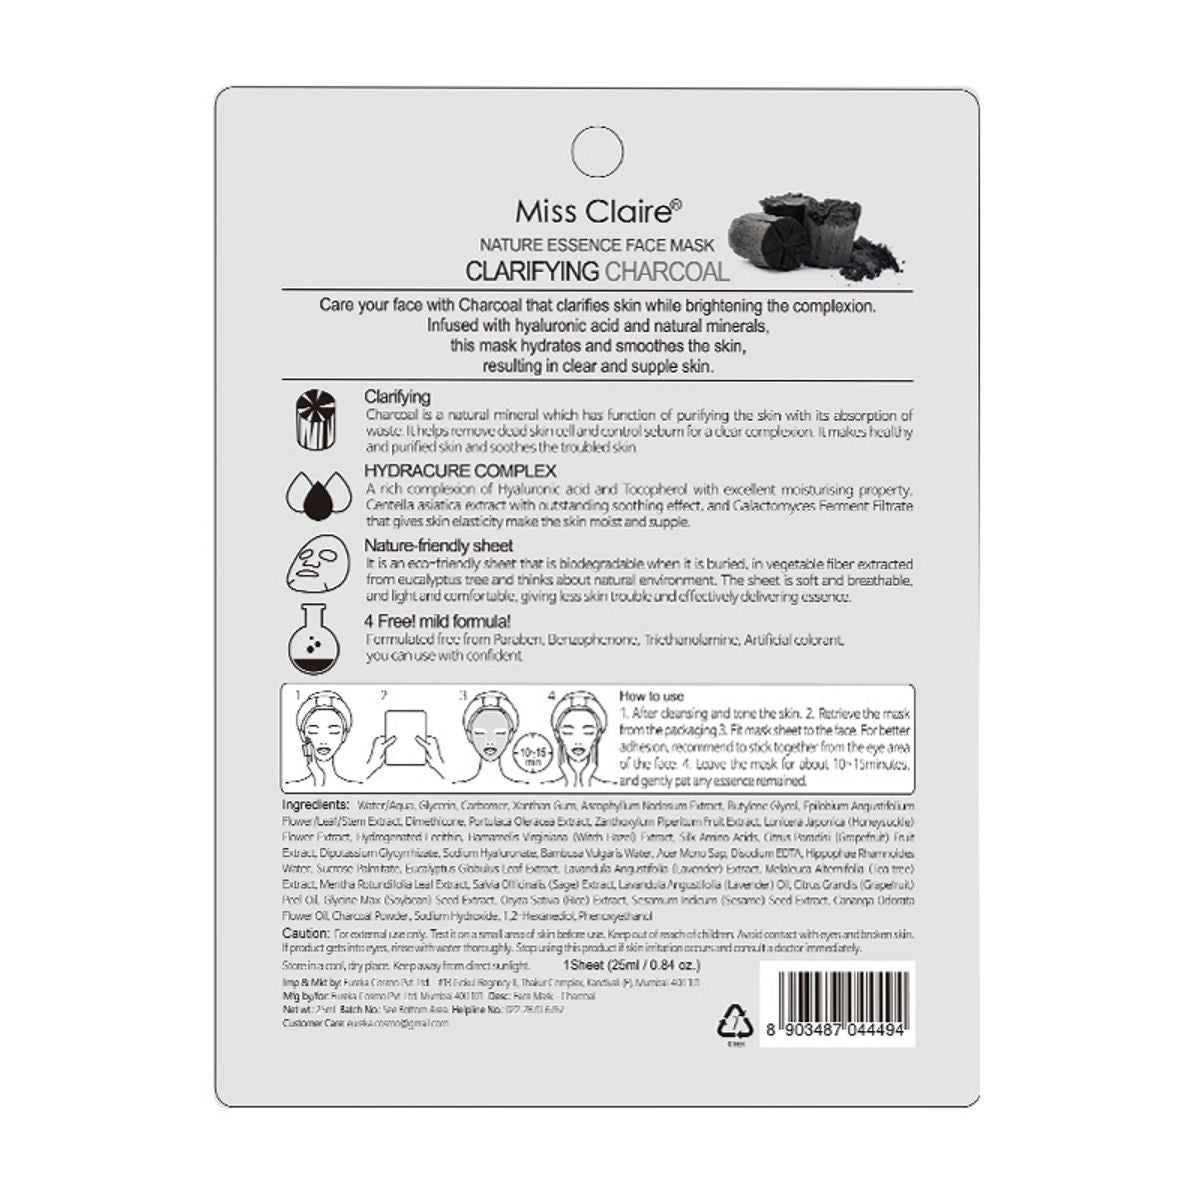 Miss Claire Nature Essence Face Mask - Charcoal Miss Claire